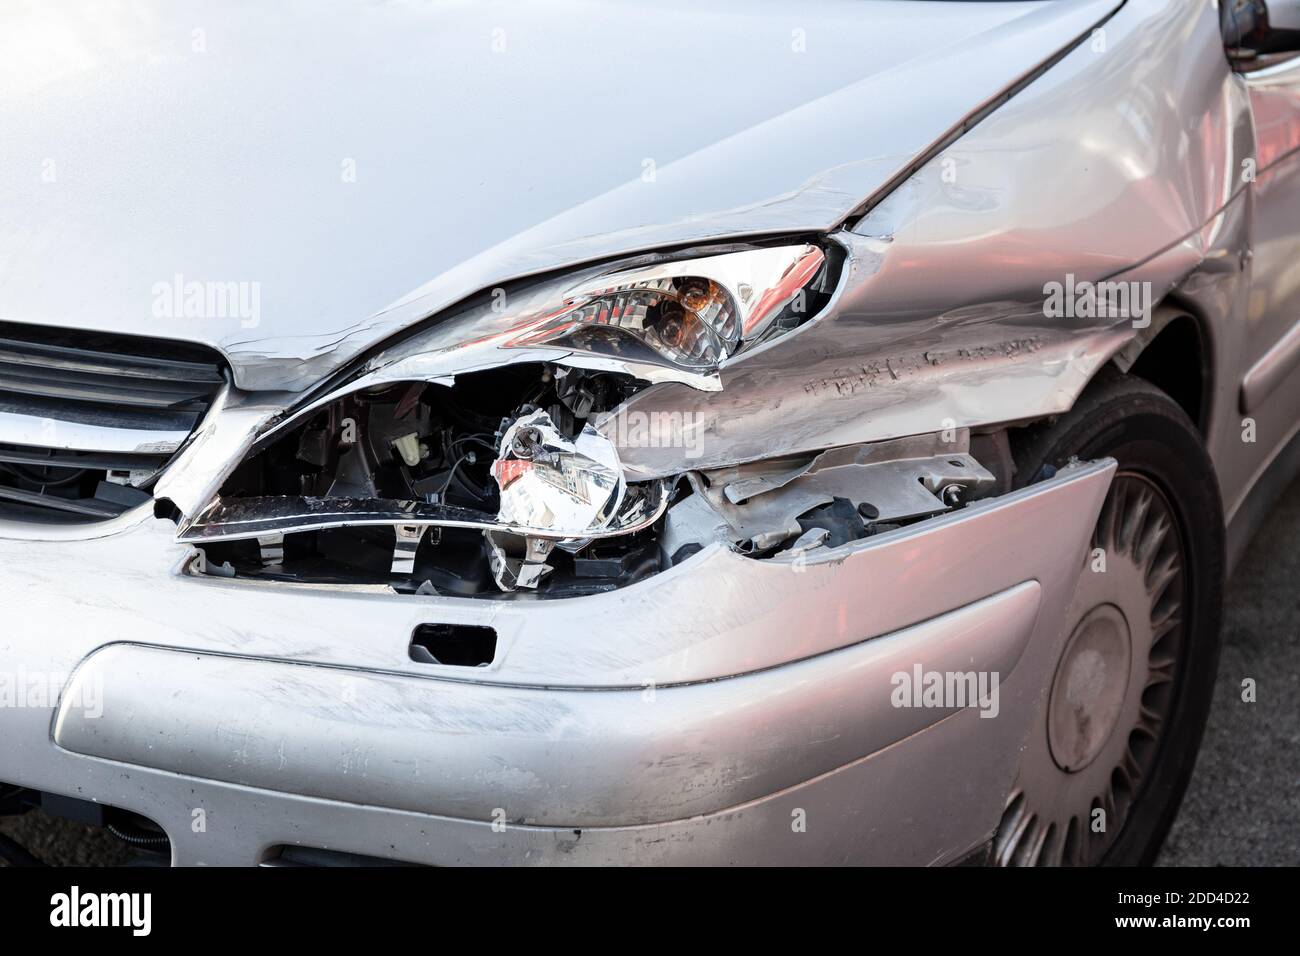 Car crash or accident. Front fender and light damage and scratches on bumper. Broken vehicle close up Stock Photo